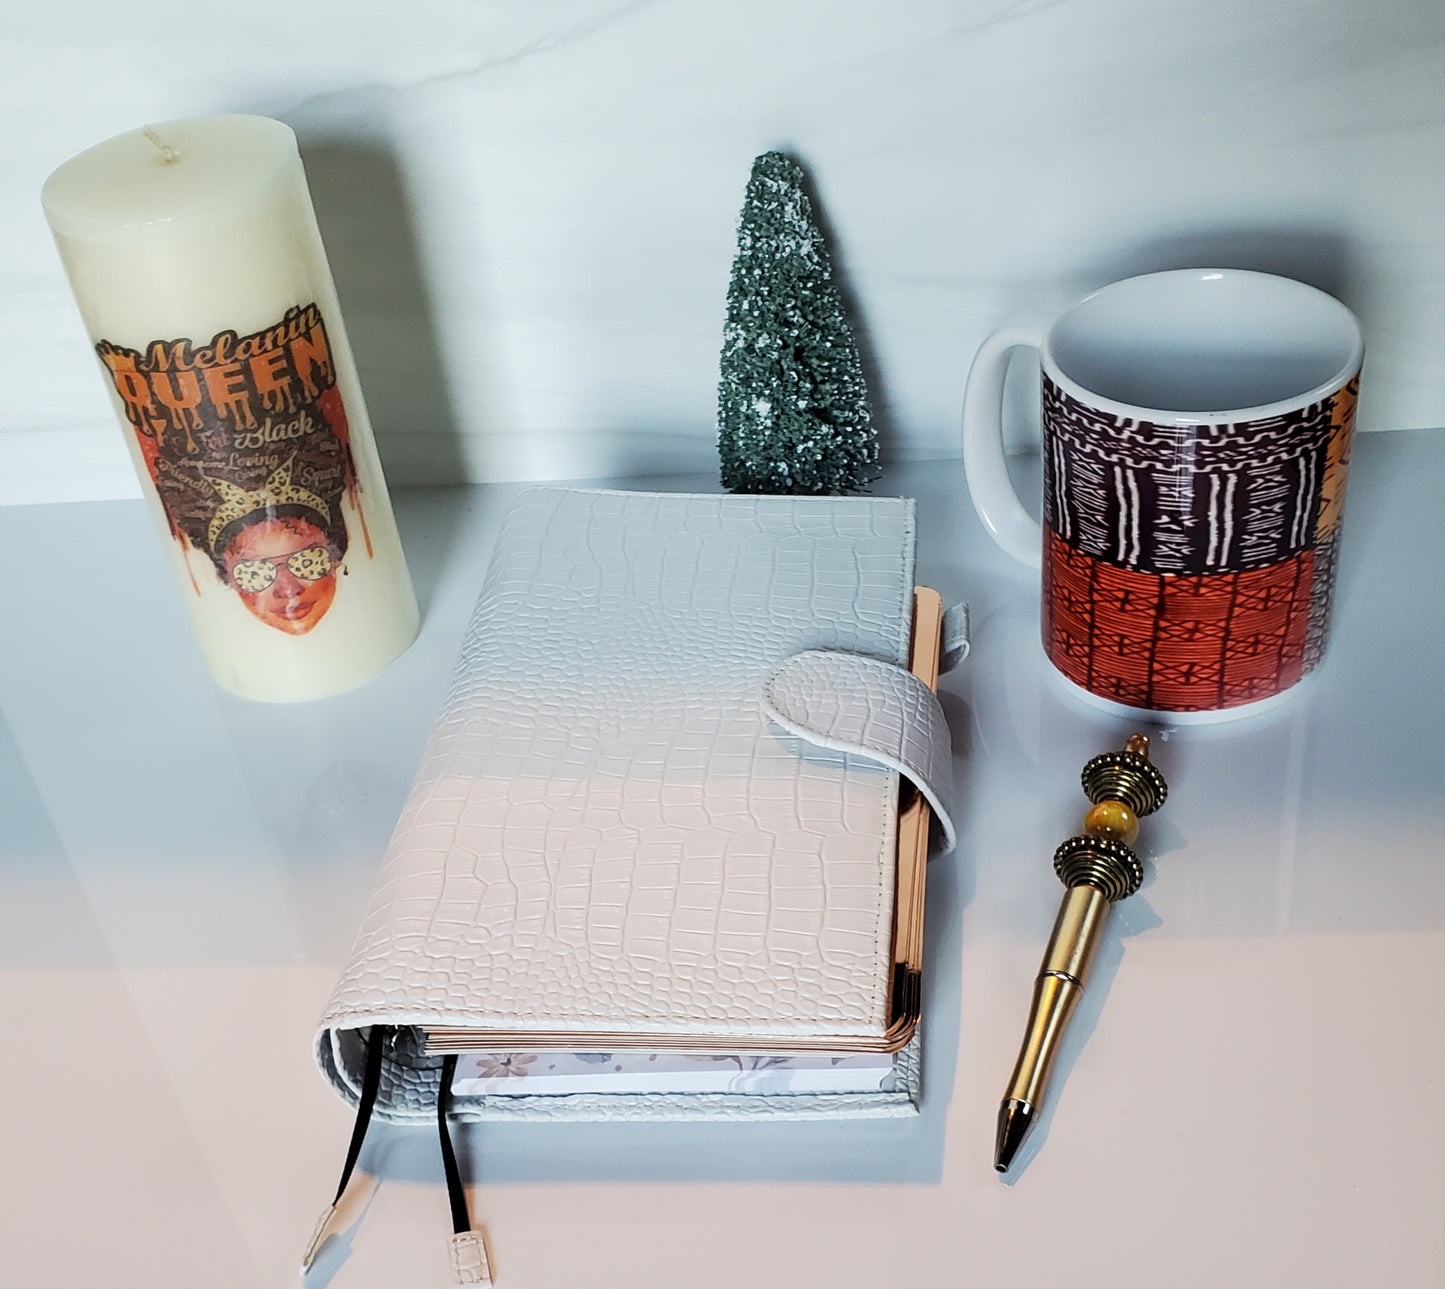 Planner Gift Set includes 2023 Annual Planner, coordinating candle, mug and writing pen.